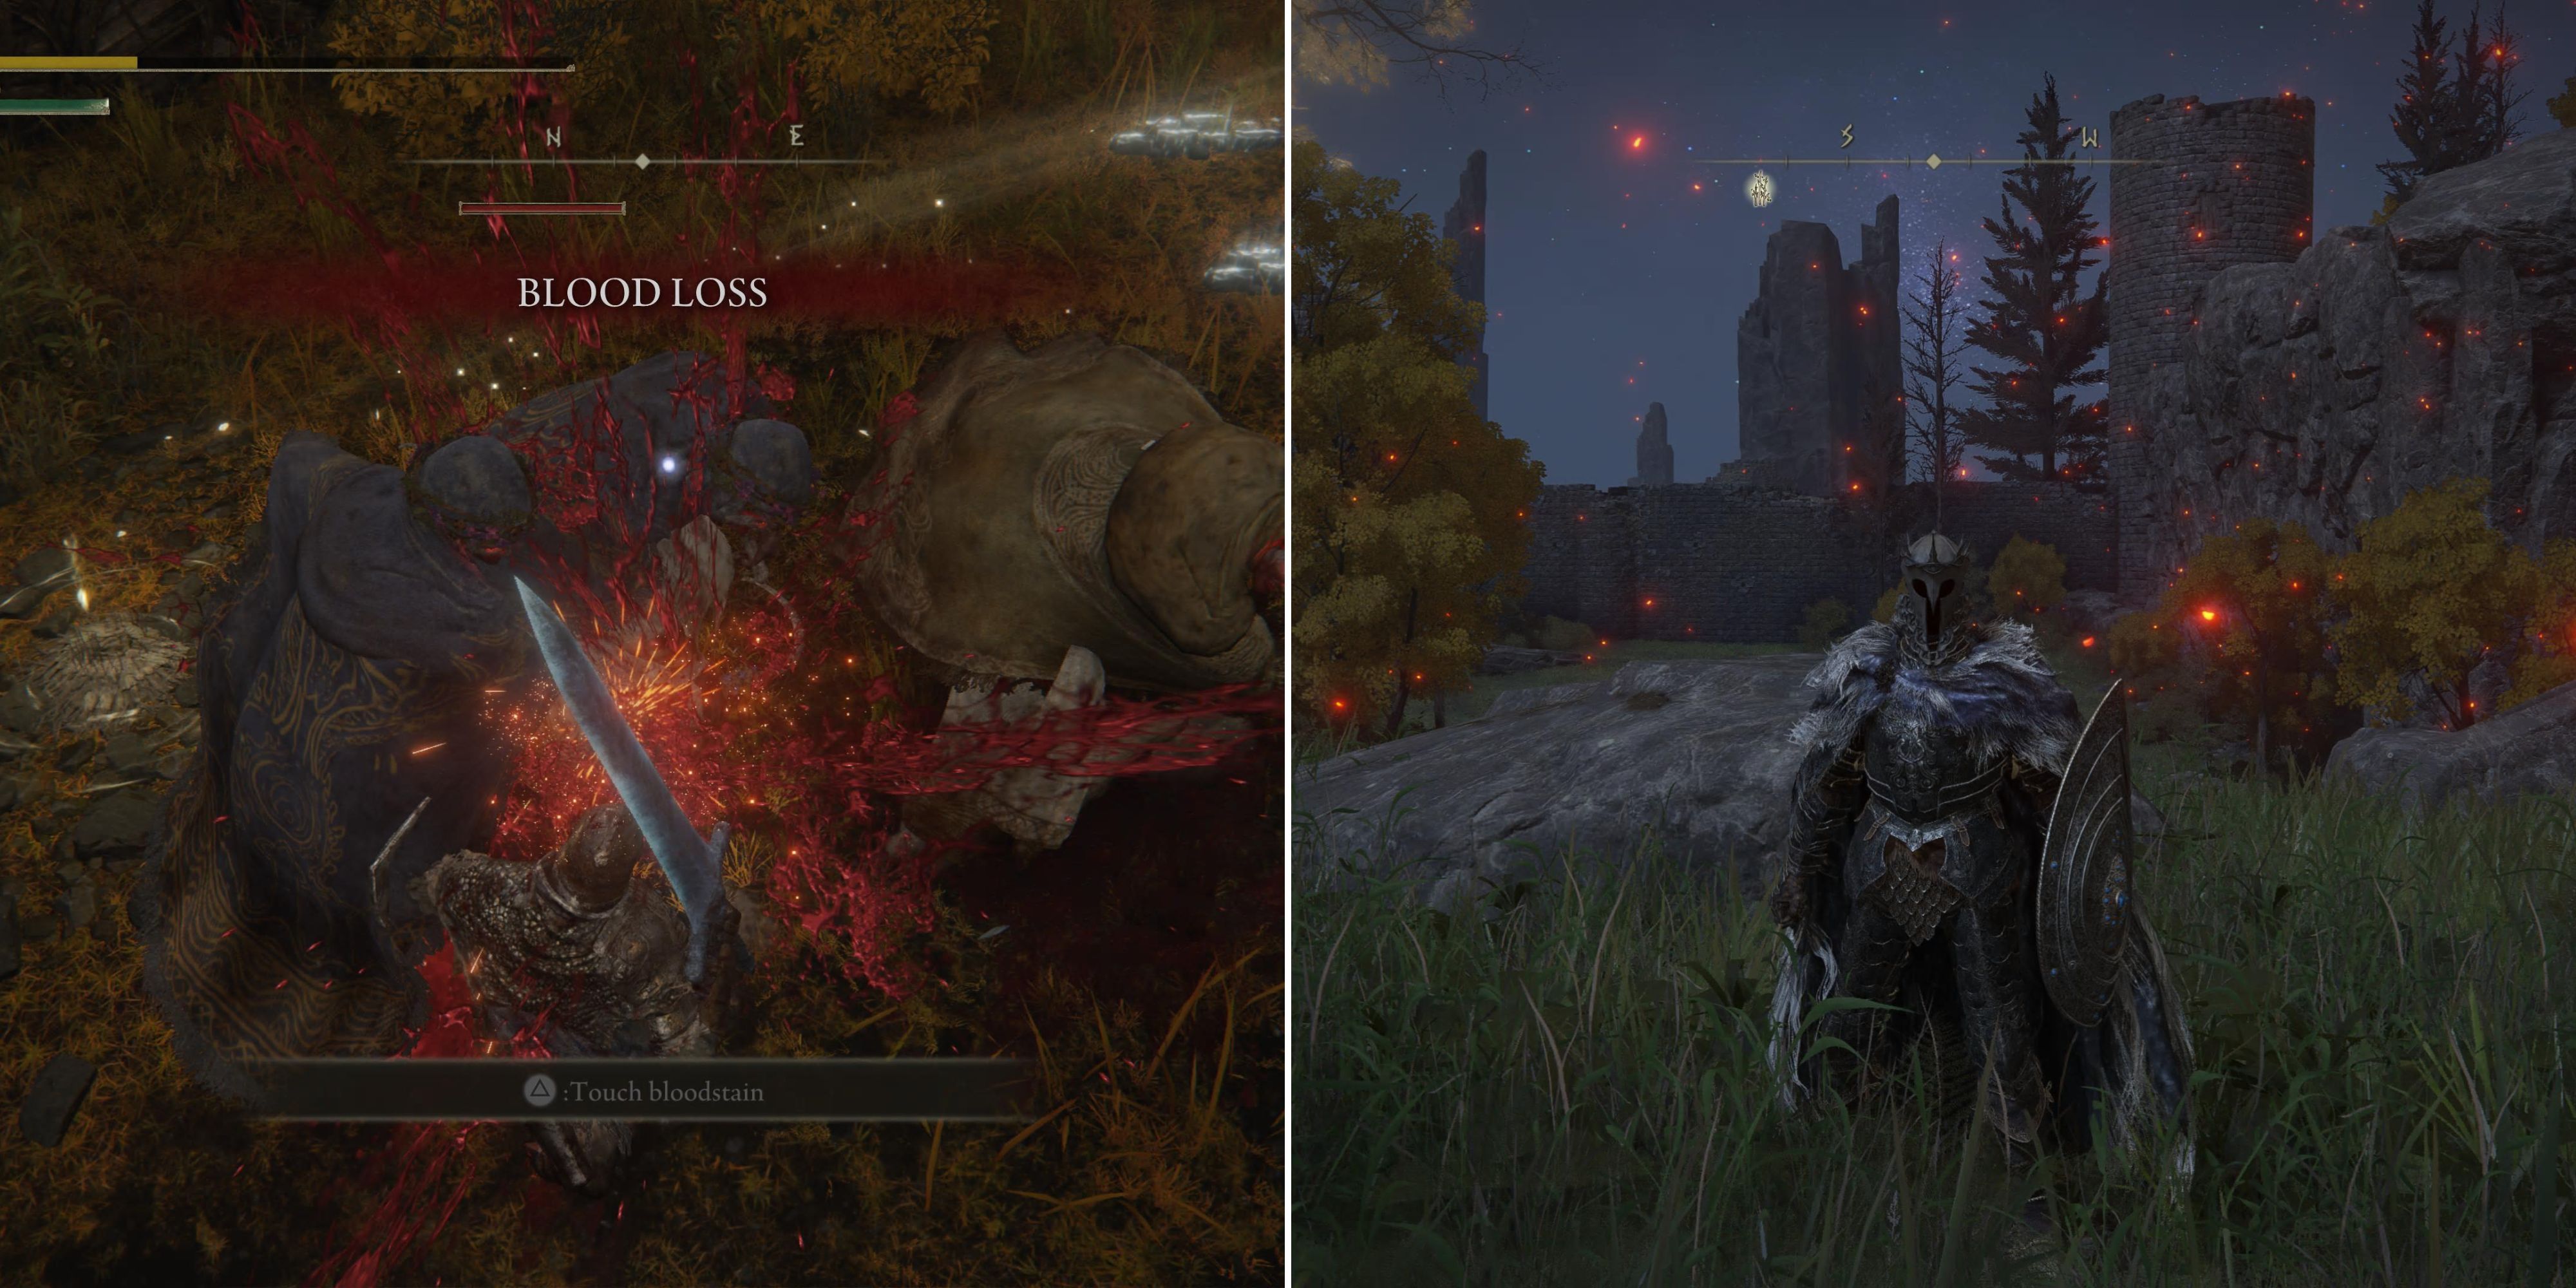 The Player Suffering Blood Loss & Wearing Heavy Armor